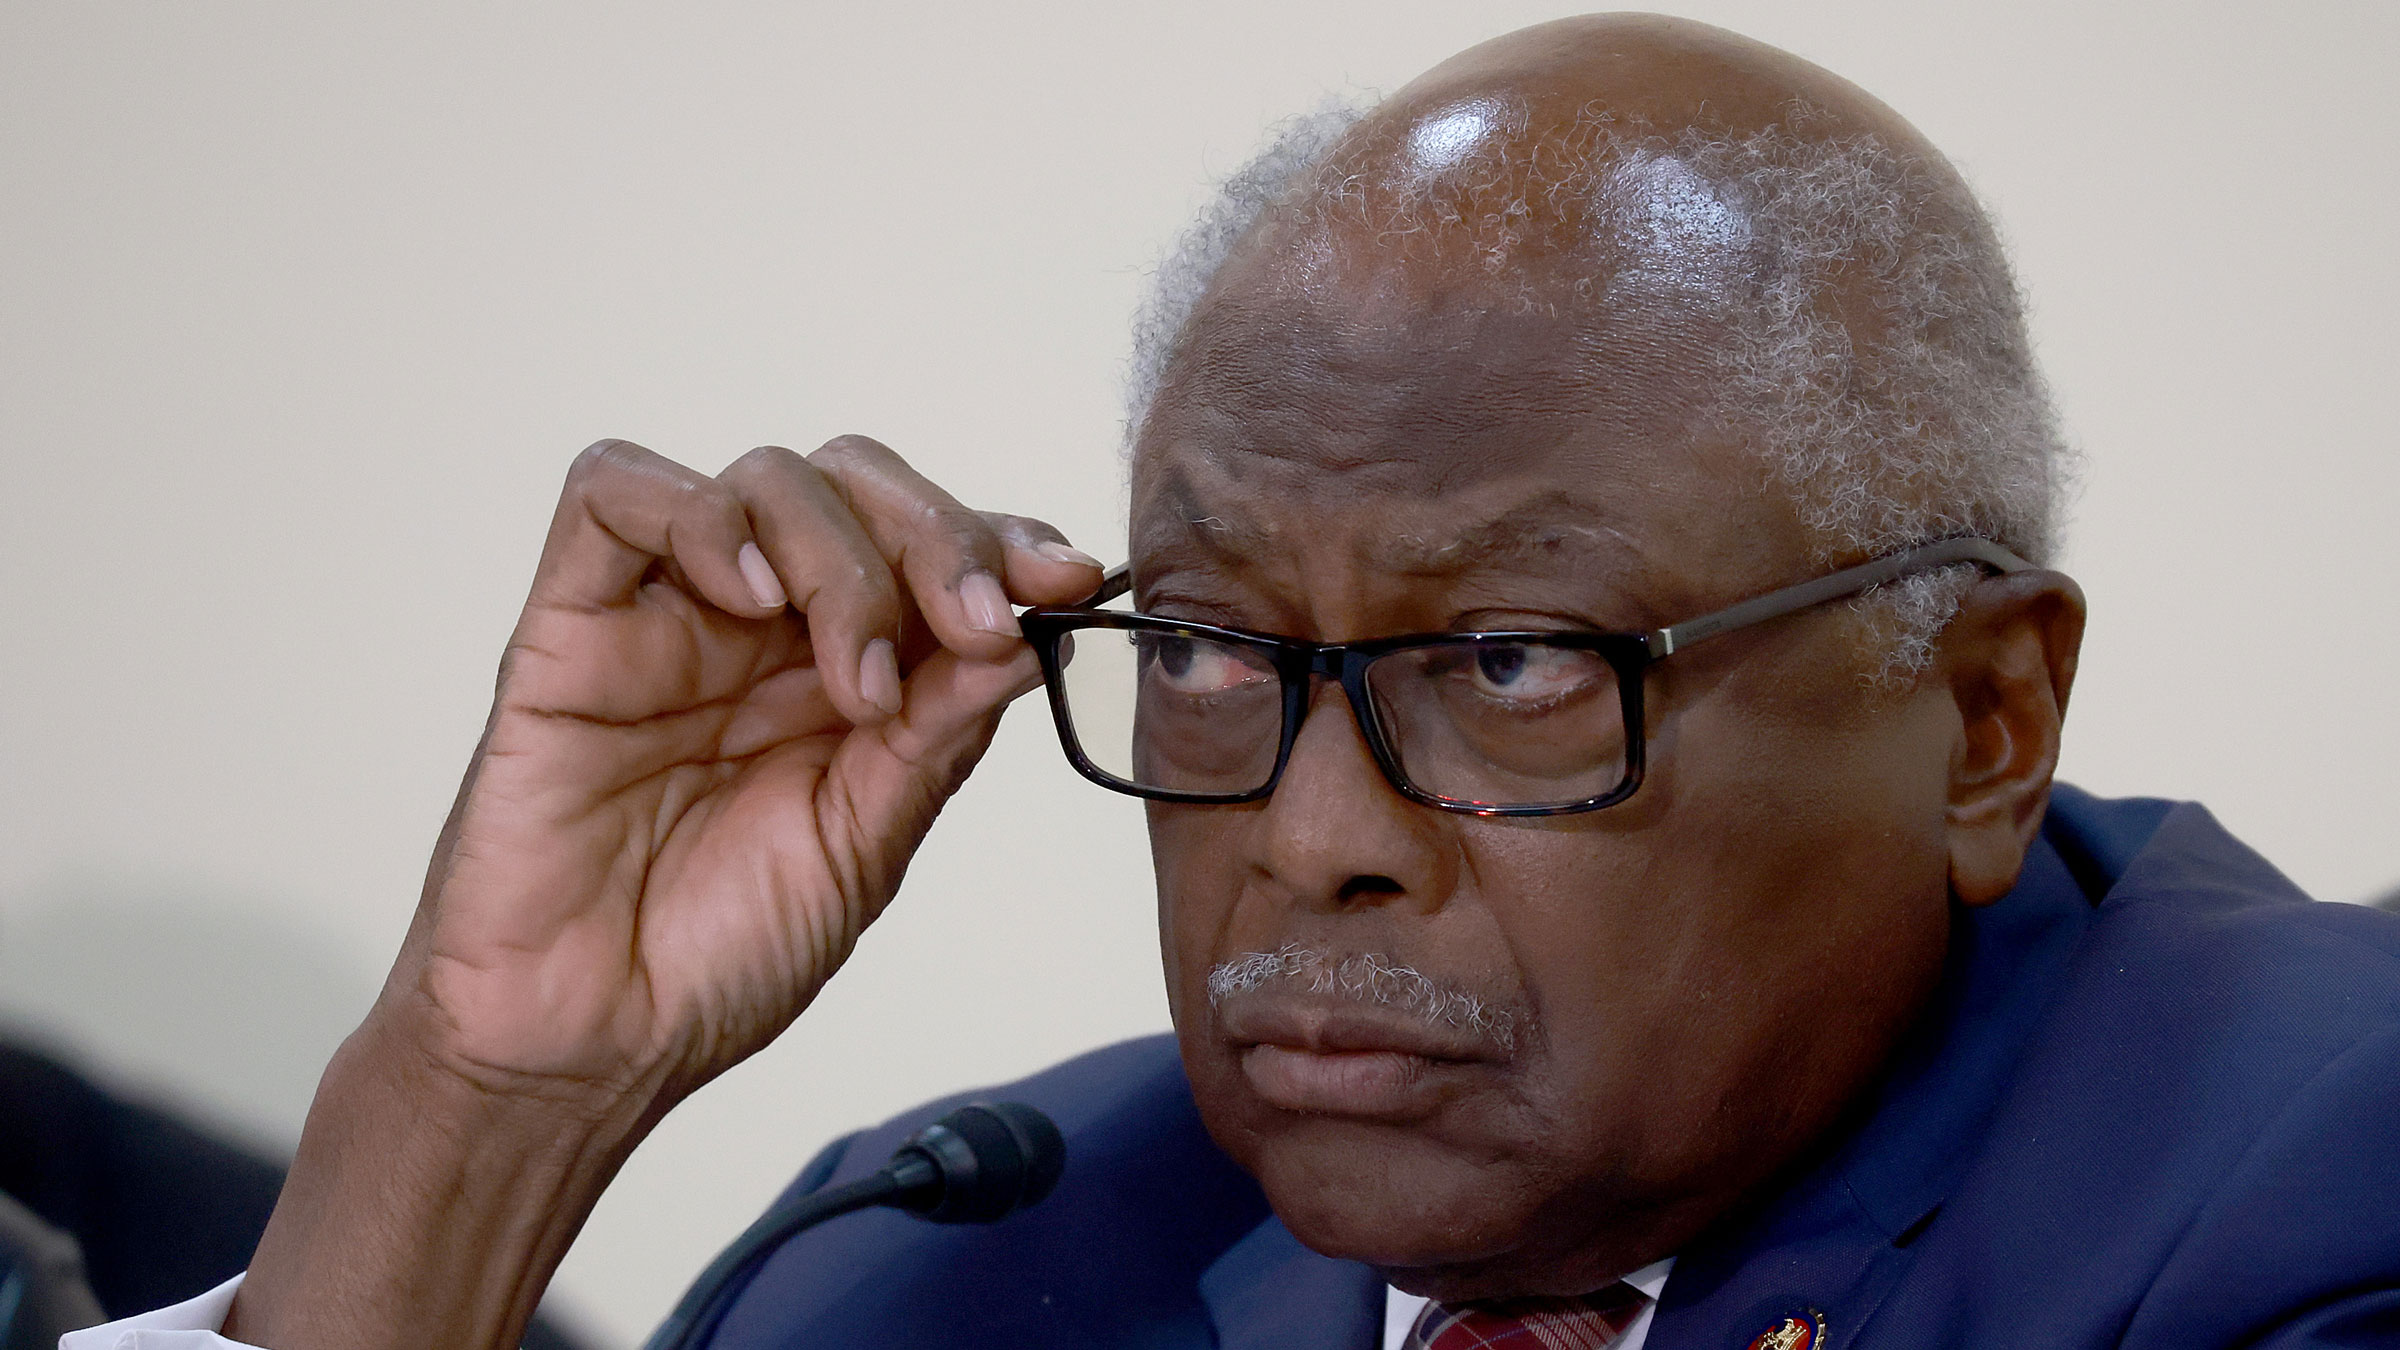 US Representative James Clyburn attended the subcommittee hearing on Tuesday.